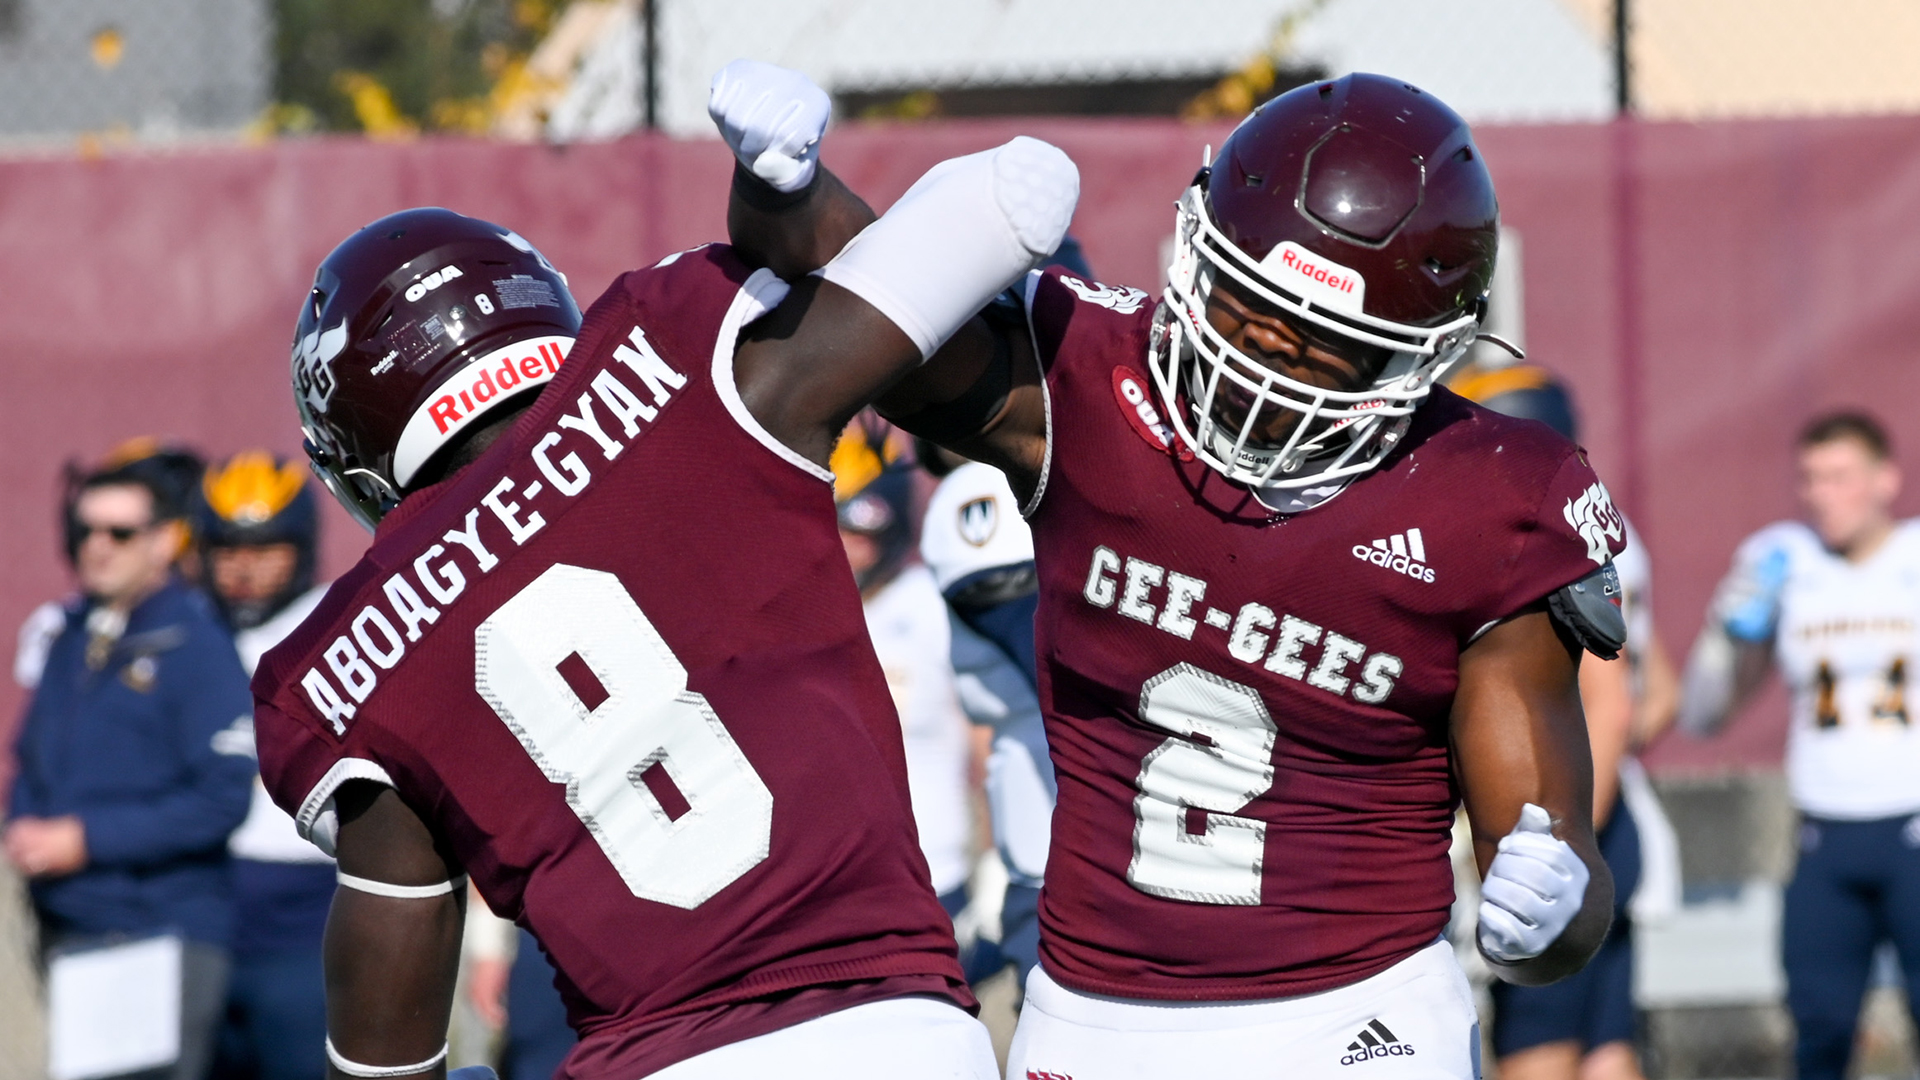 RECAP: #6 Gee-Gees advance to OUA semifinals with win over Windsor